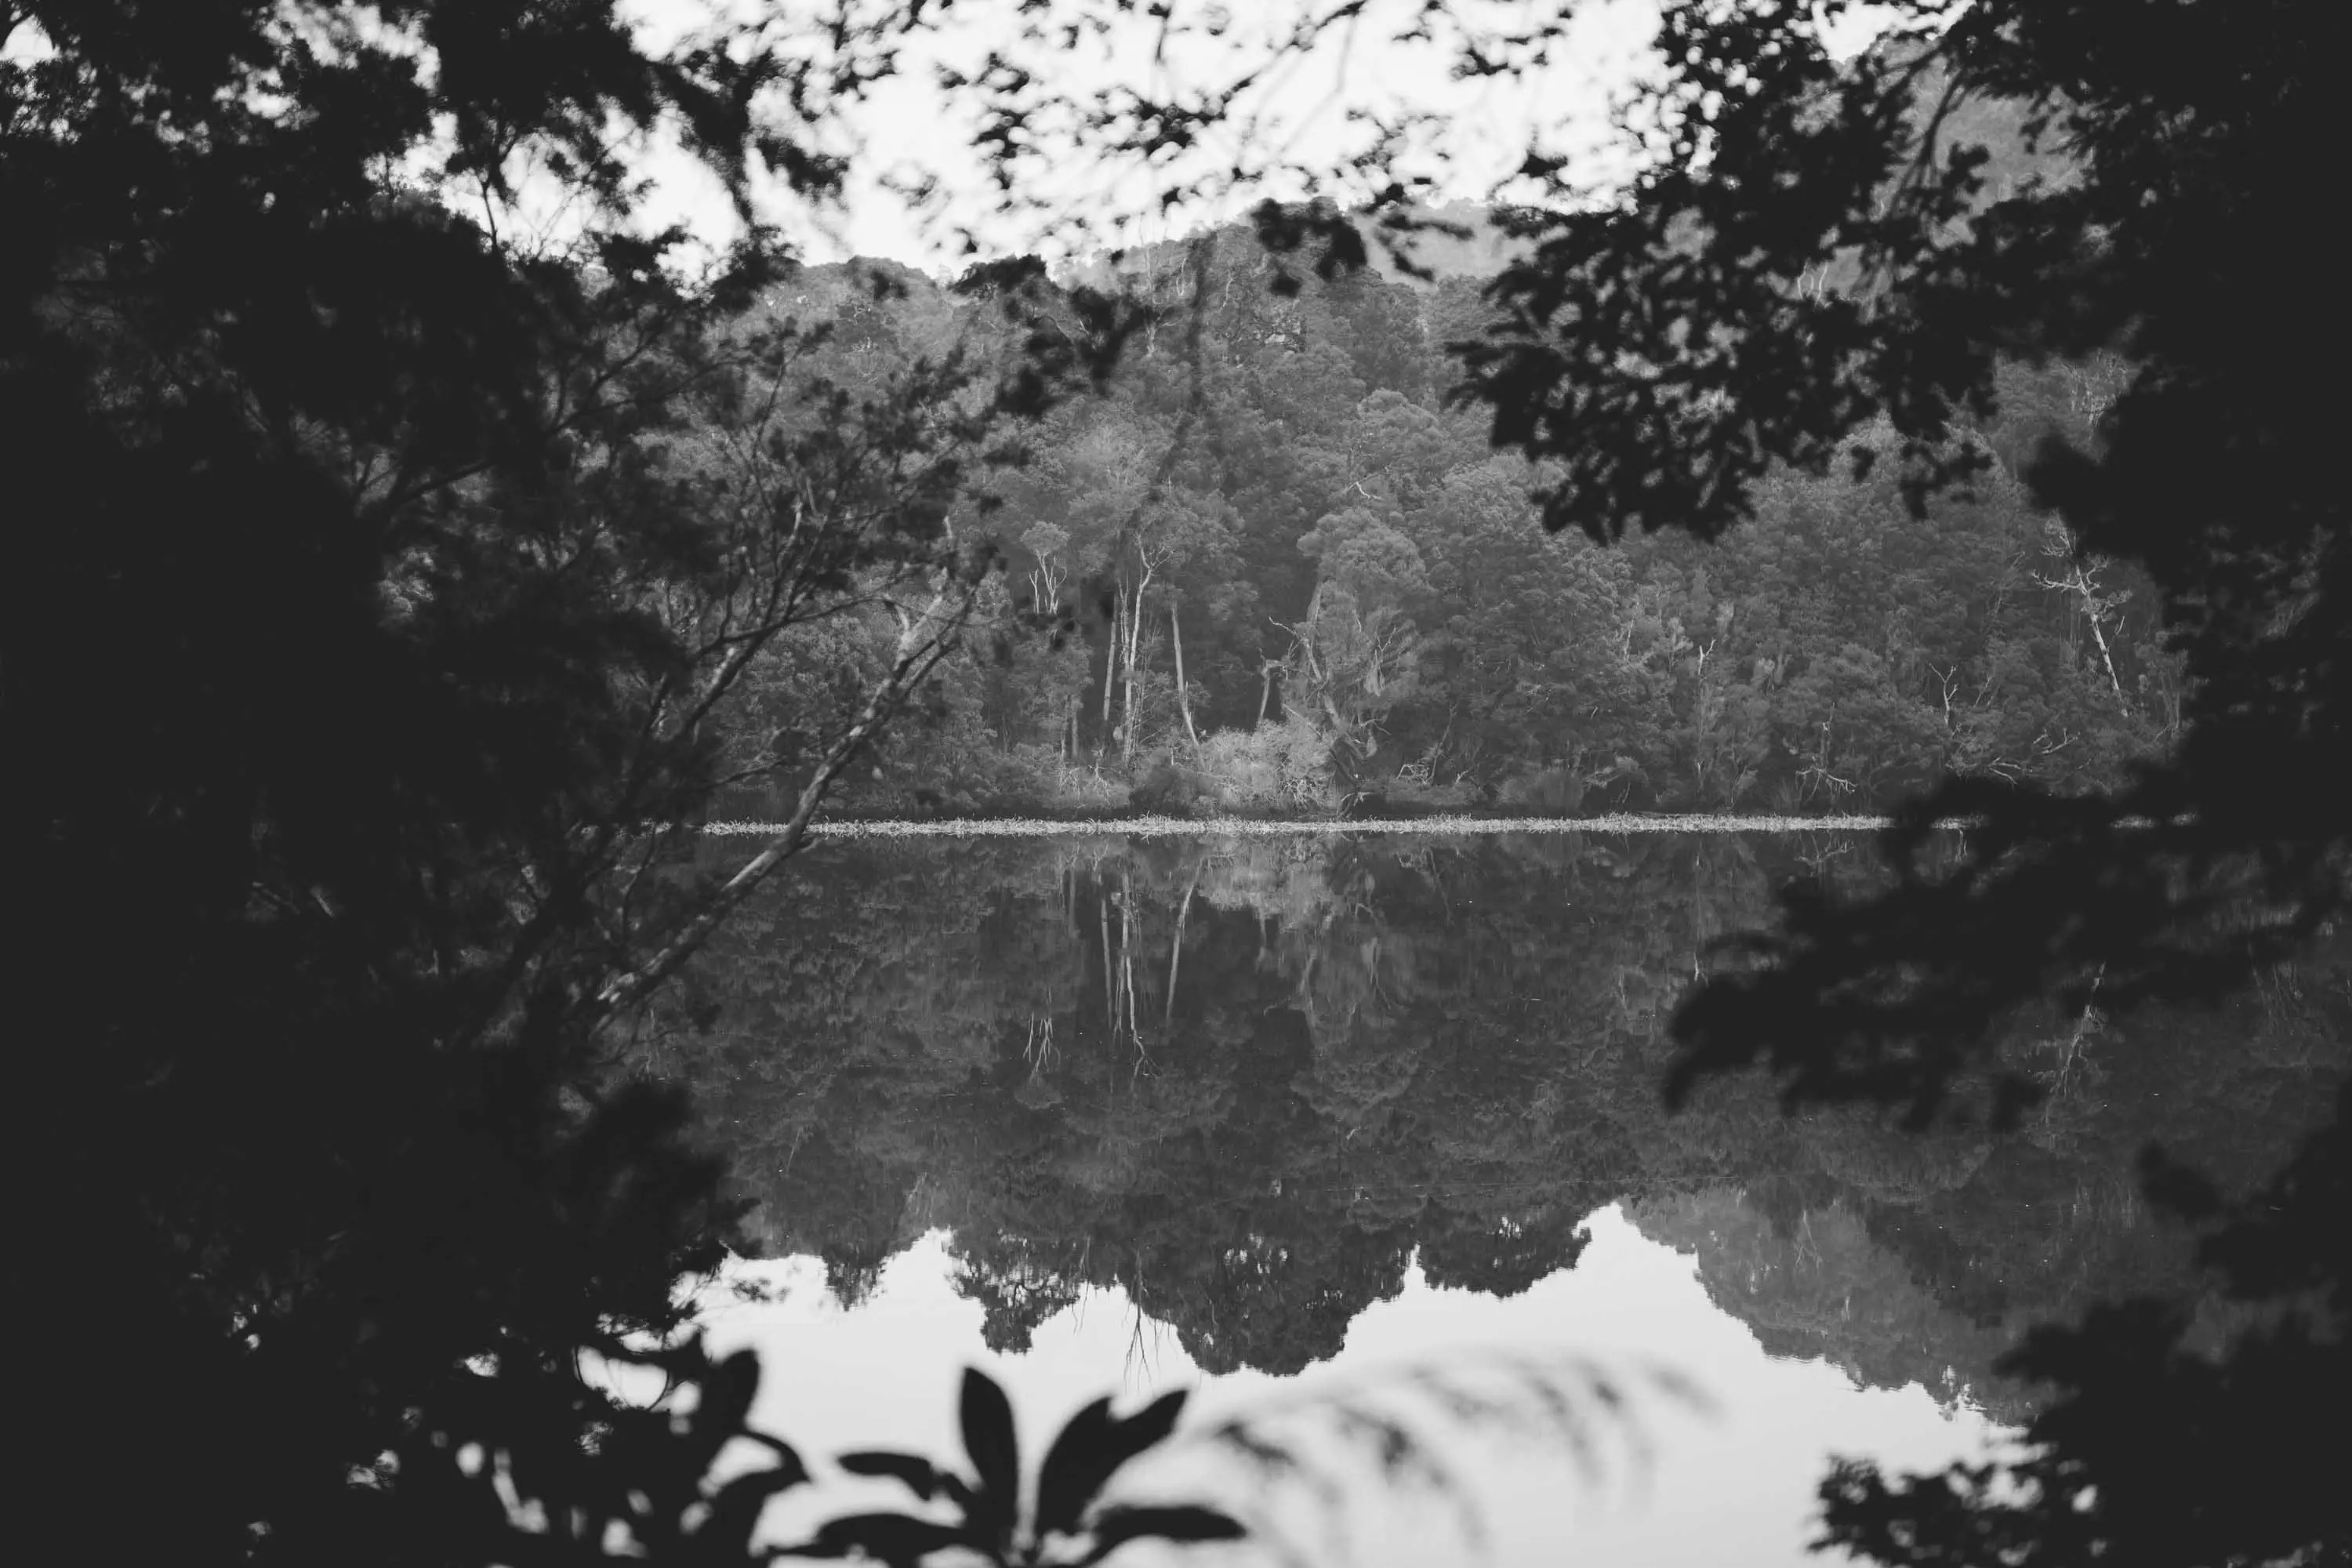 A large still lake reflects the dense forest on the opposite bank.